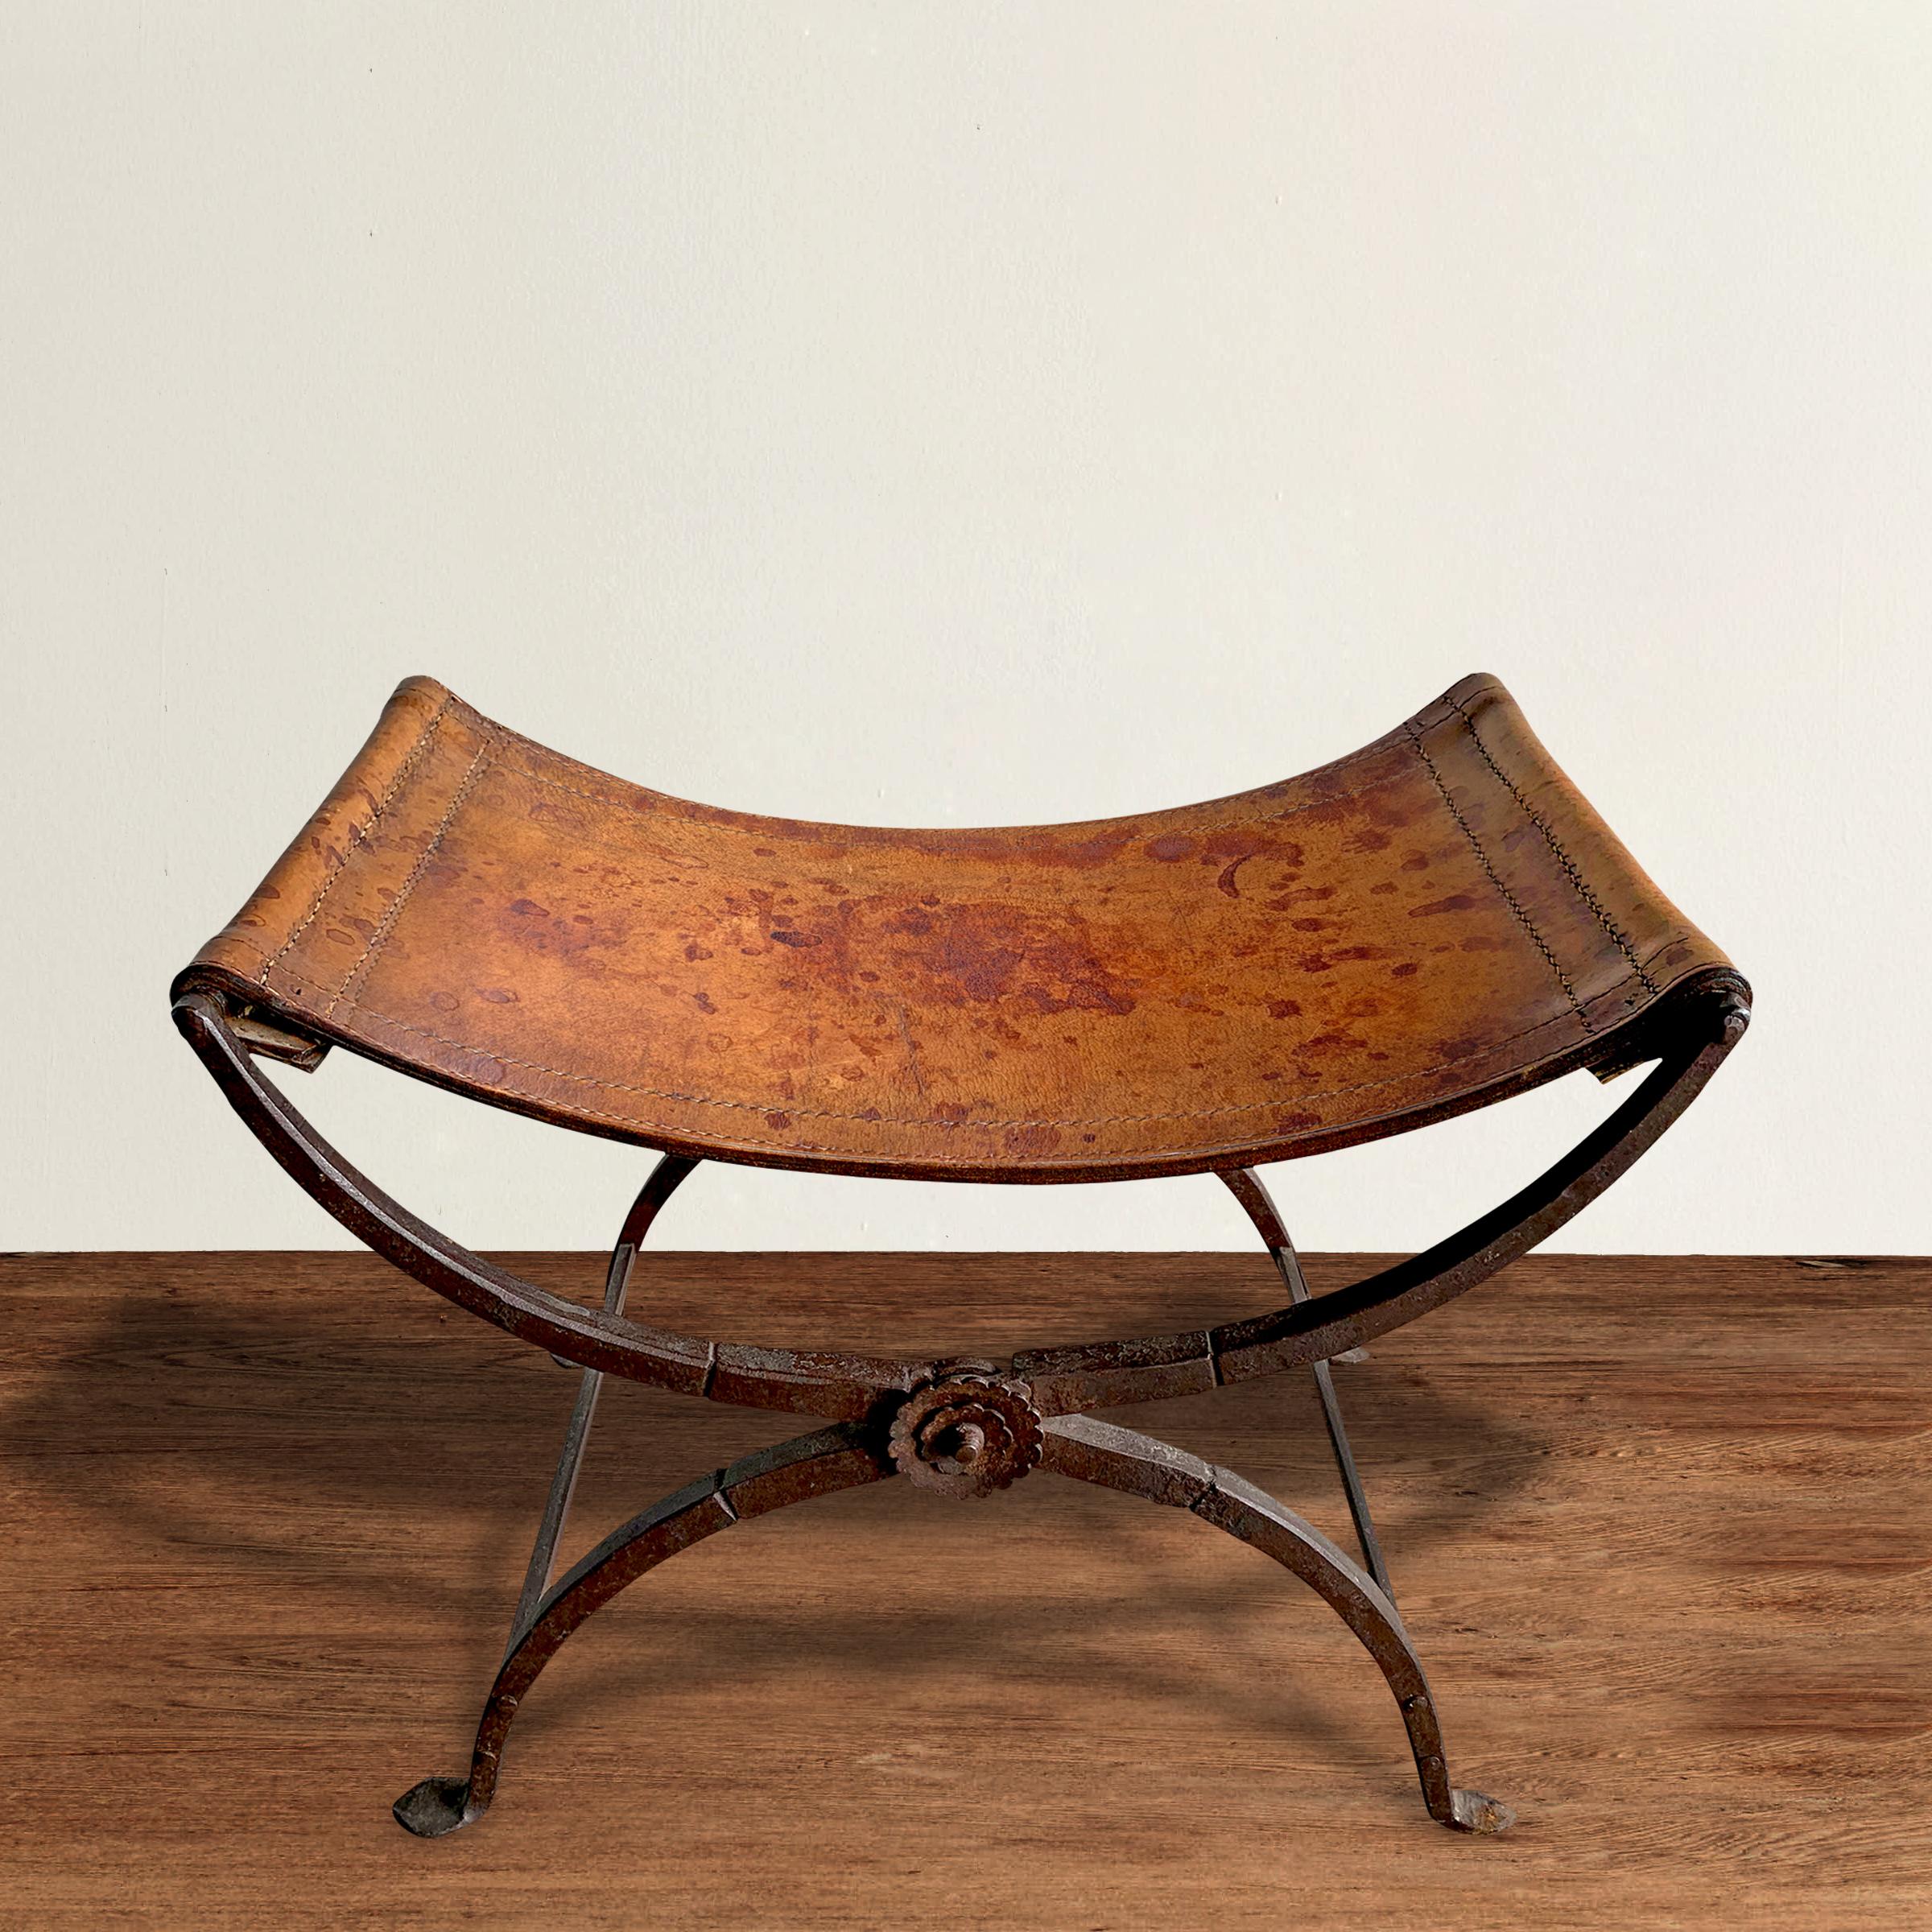 A striking 19th century Italian wrought iron folding Curule stool with a handstitched saddle leather seat and decorative floral rosettes on both sides where the legs cross. Curule seats were designed by early Romans and were seen as a symbol of